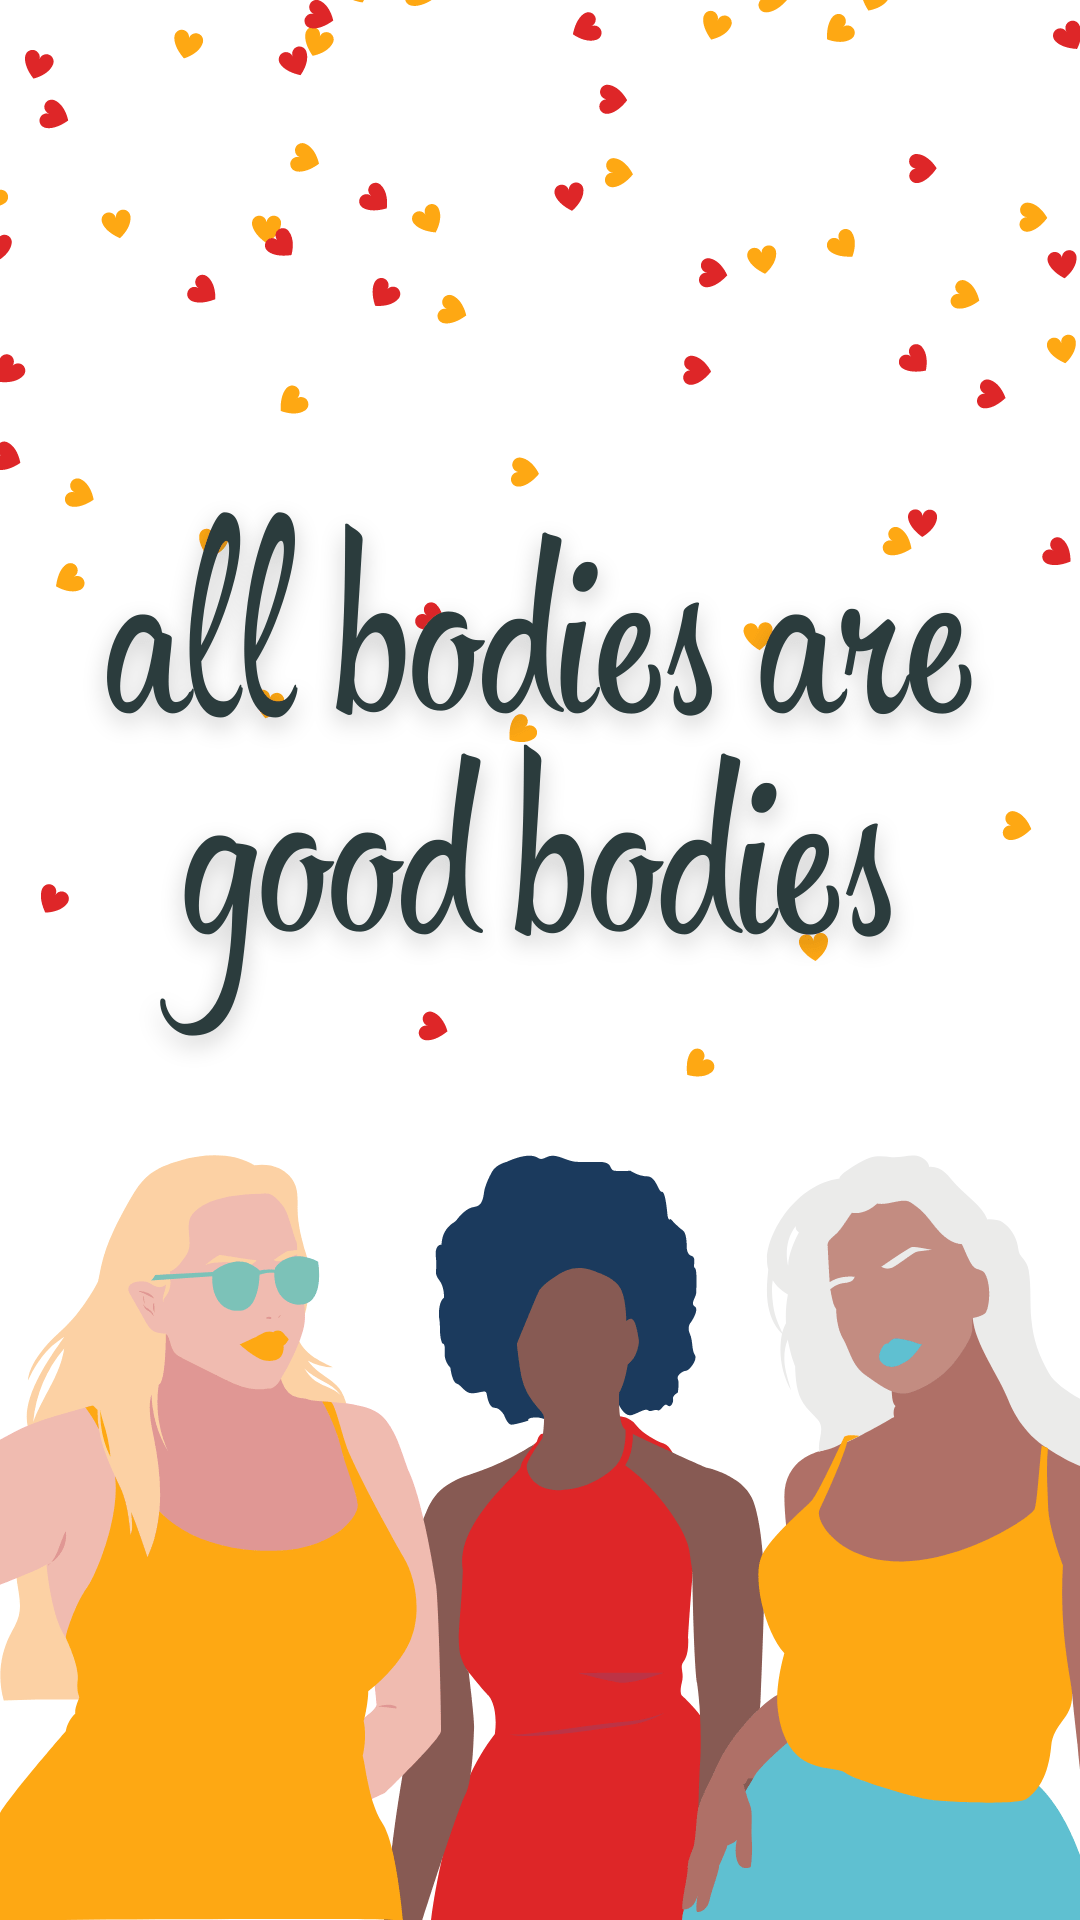 all bodies are good bodies | Plus Size & Pint Size | The small company sizing debate